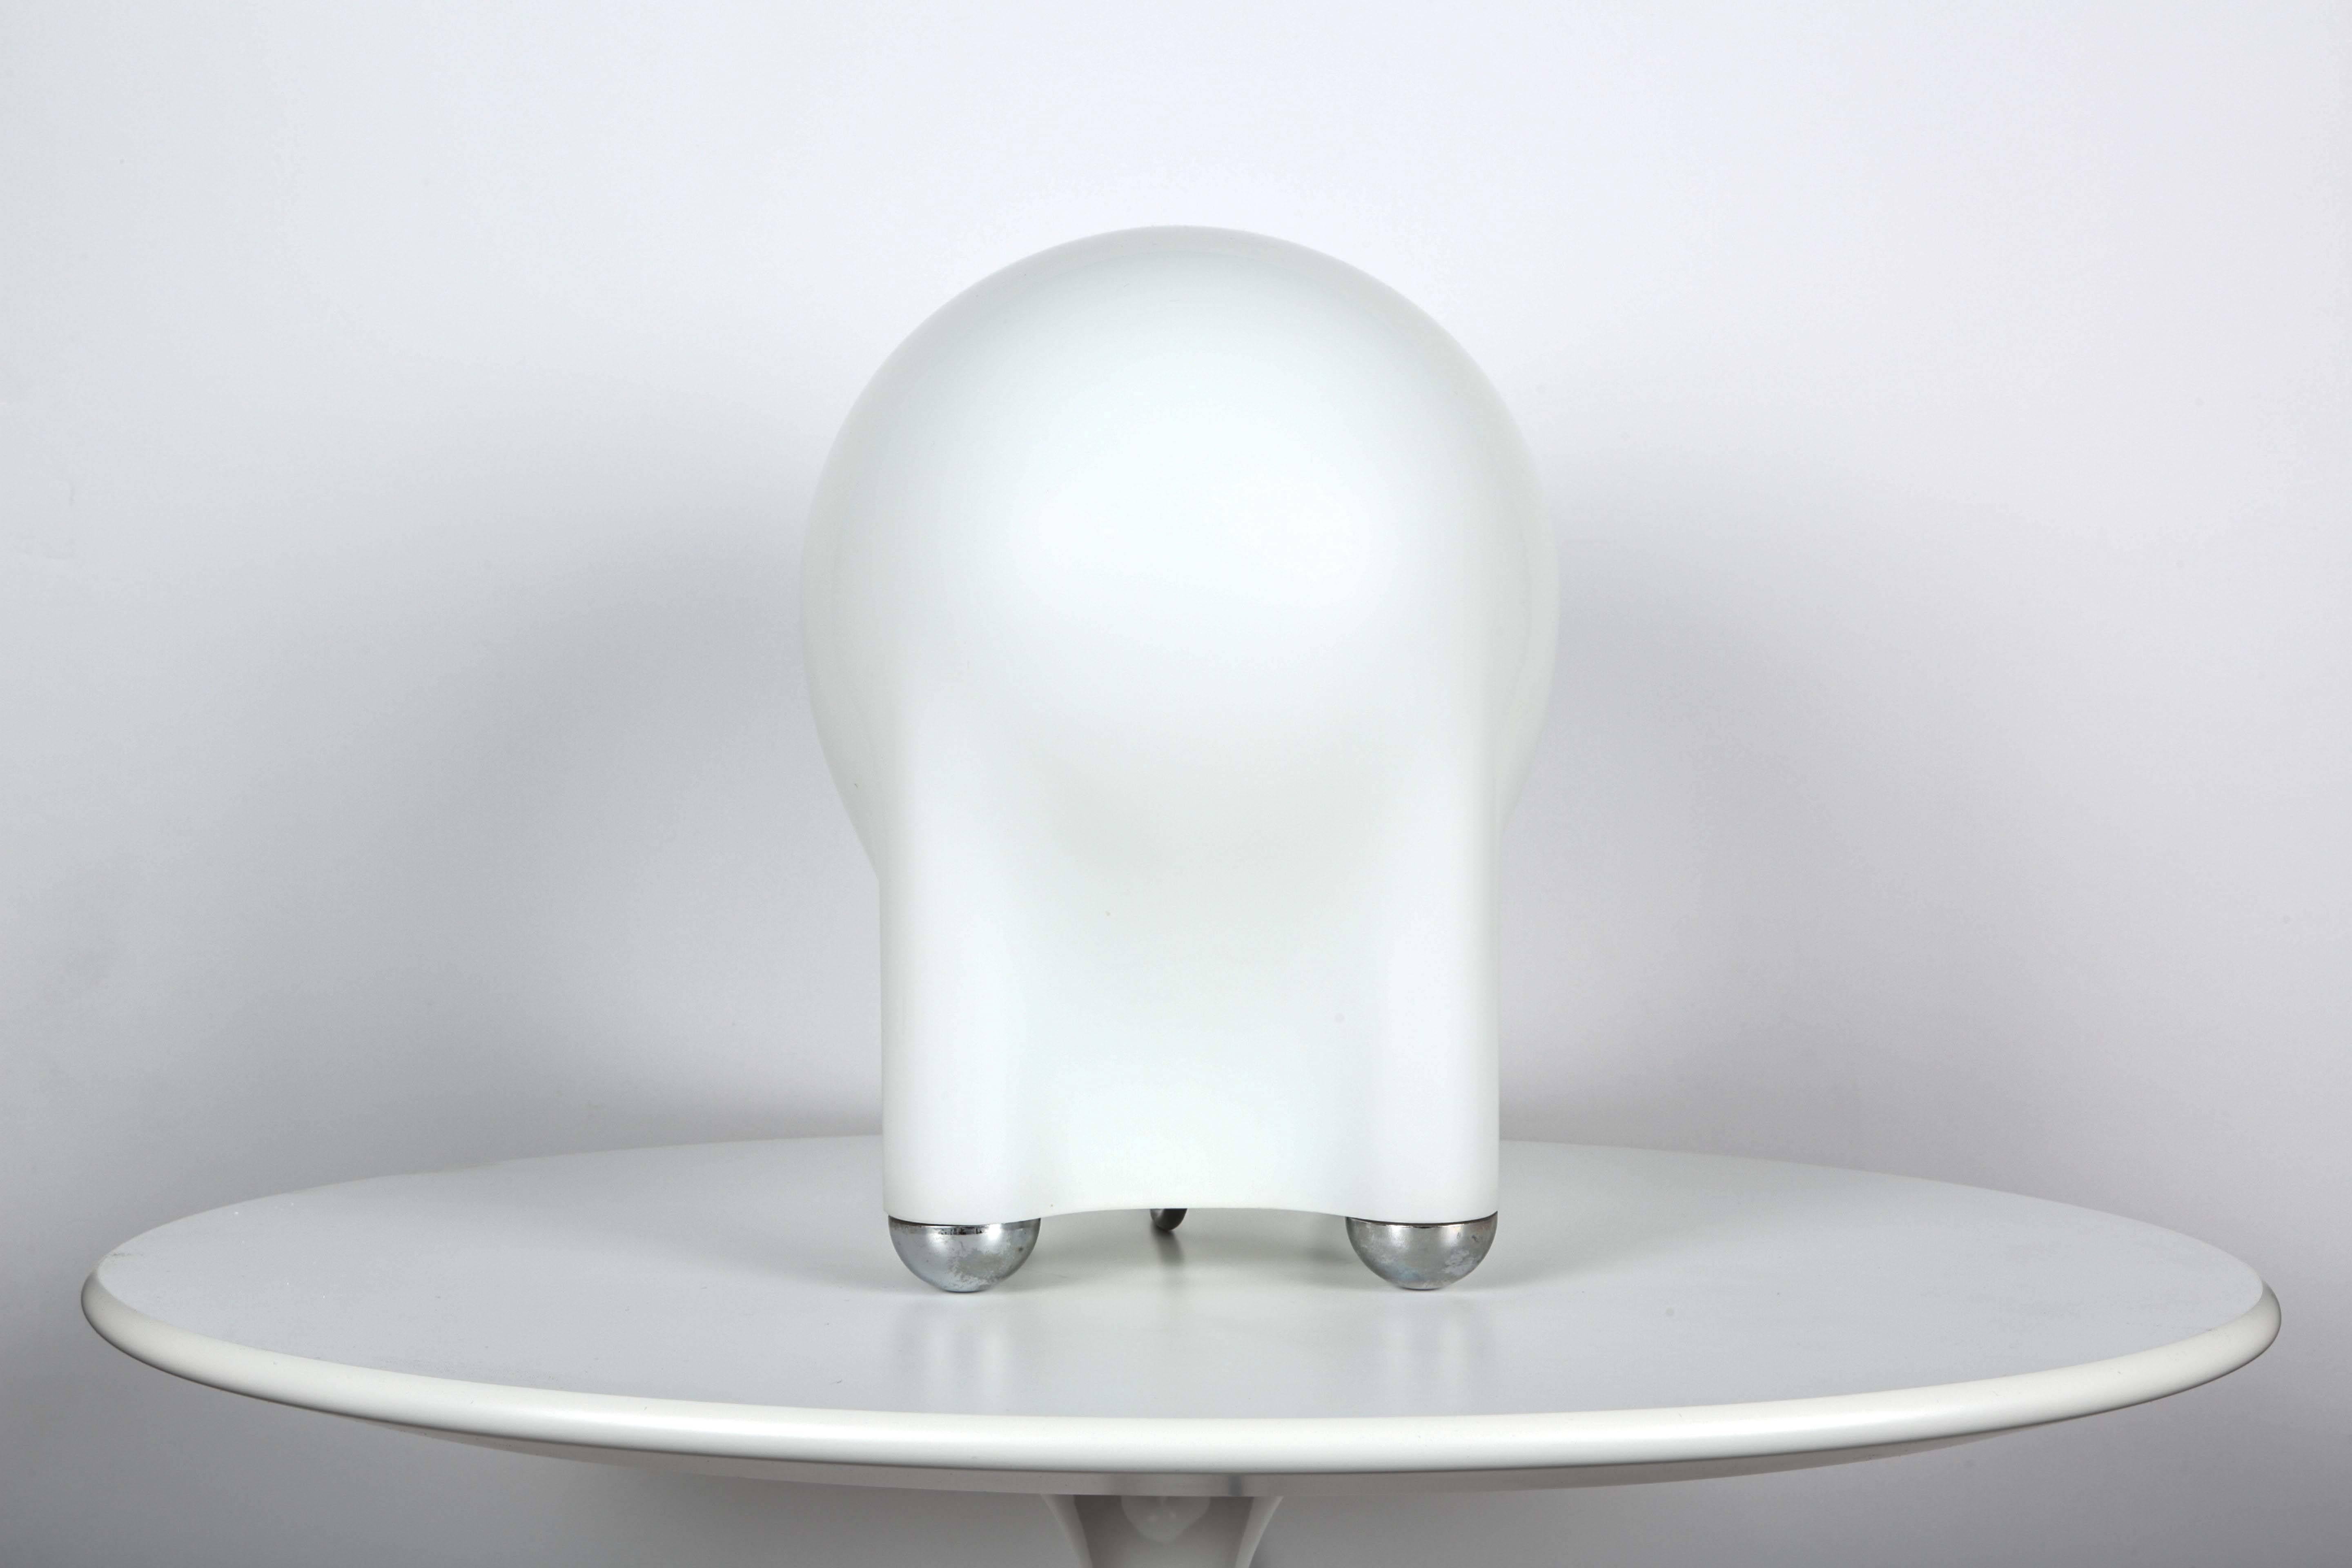 Giotto Stoppino 'Drop' Table Lamp for Tronconi c. 1970s. Executed in sculptural opaline glass and metal.